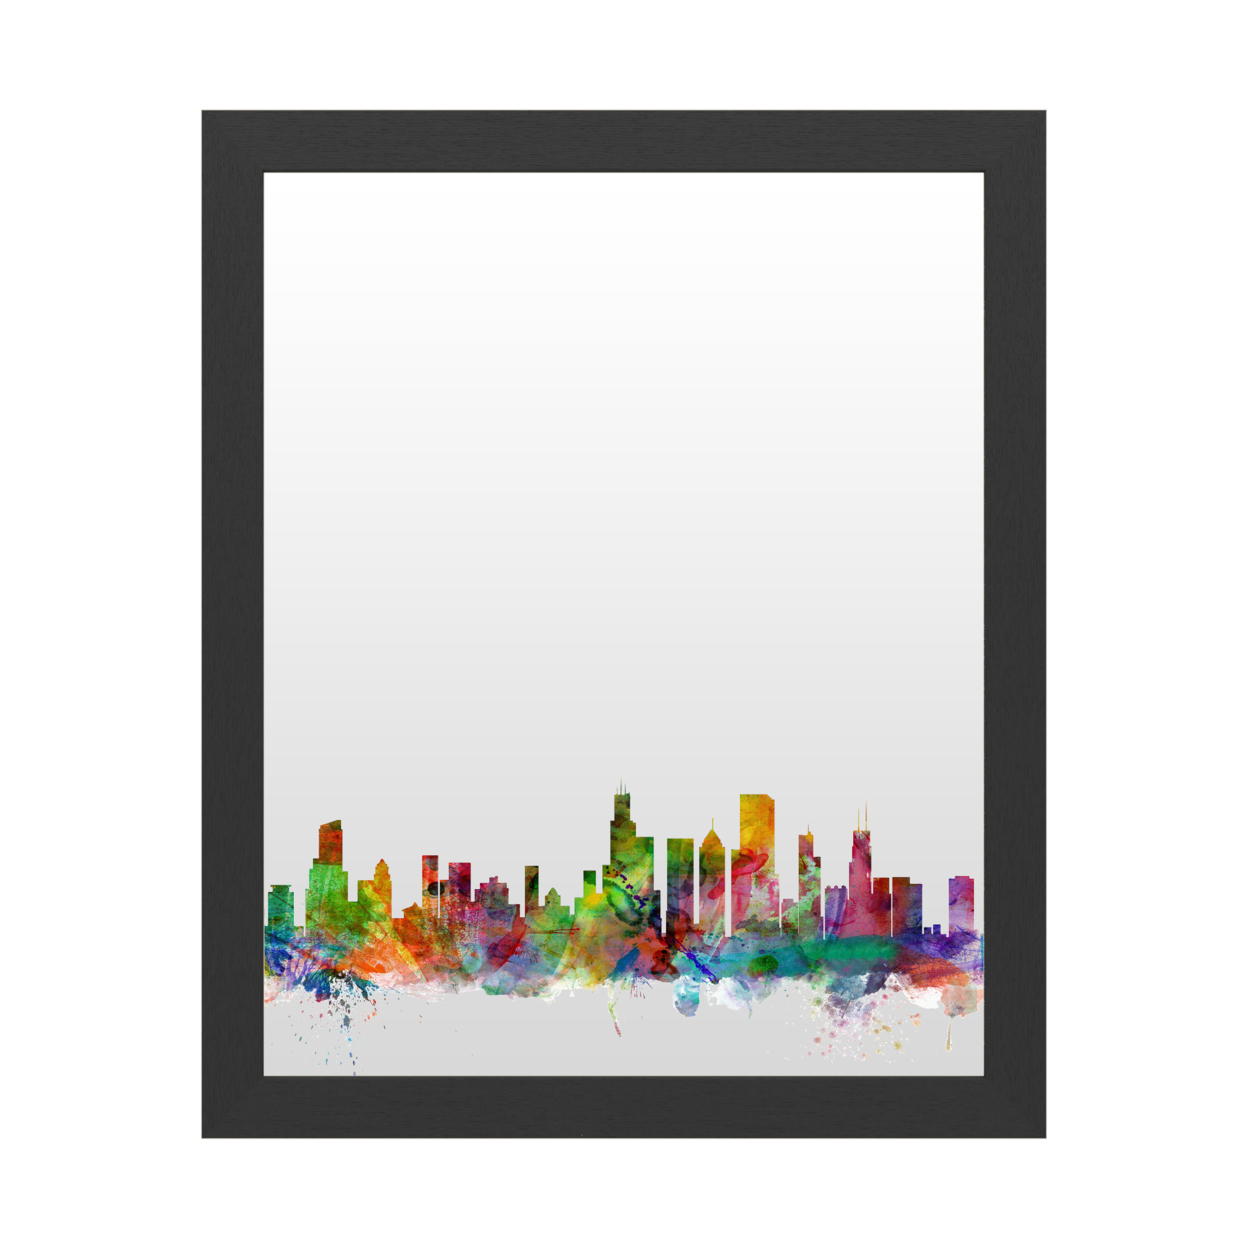 Dry Erase 16 X 20 Marker Board With Printed Artwork - Michael Tompsett Chicago Illinois Skyline White Board - Ready To Hang